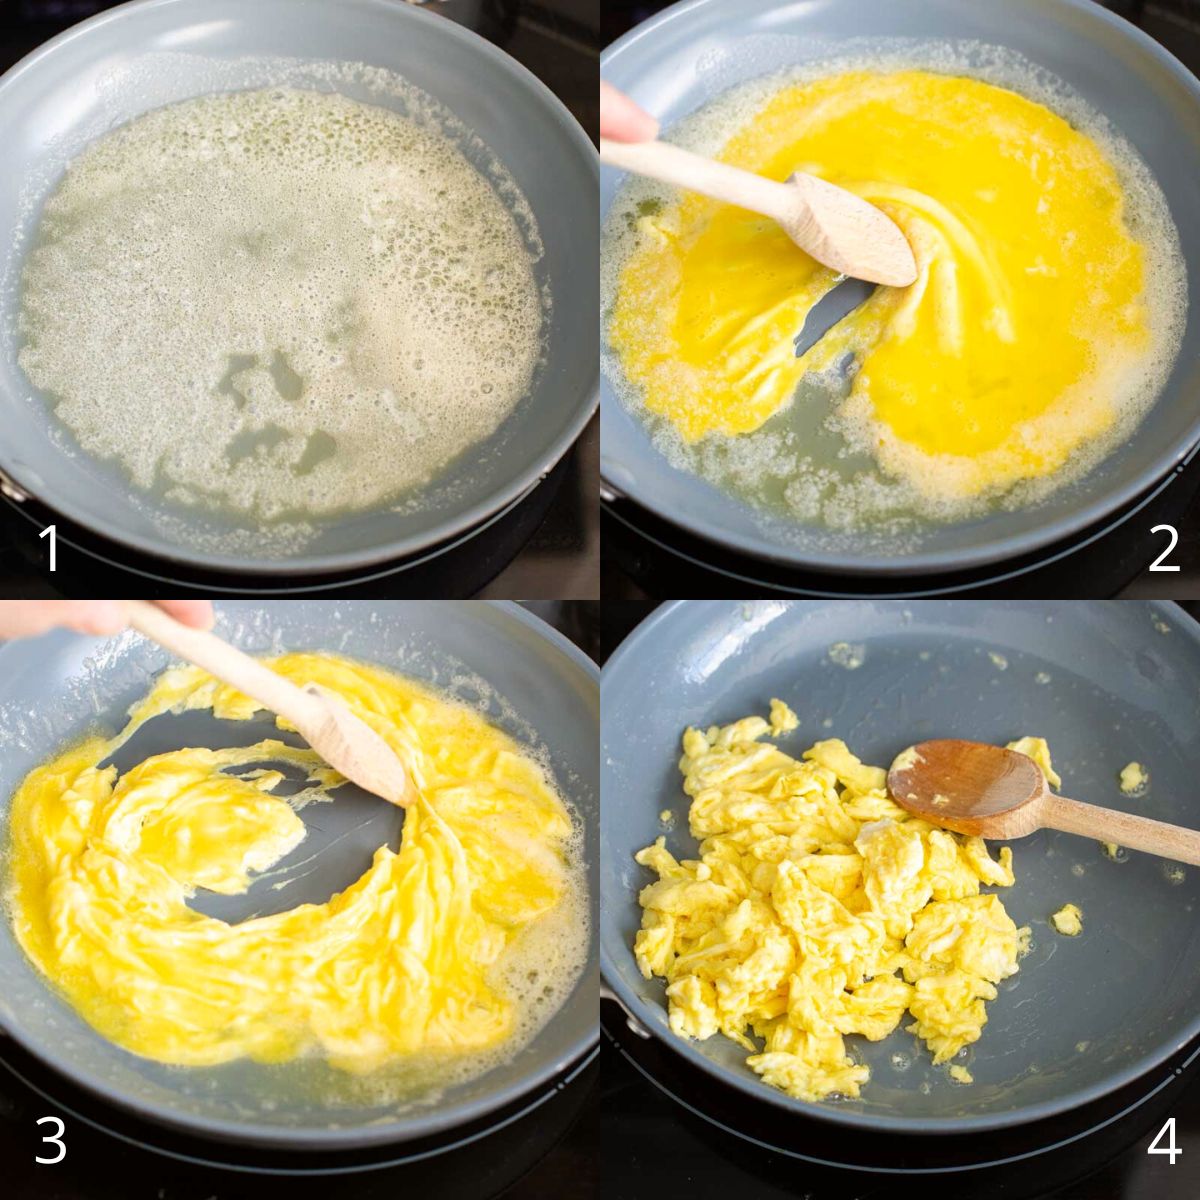 The step by step photos show how to scramble eggs.